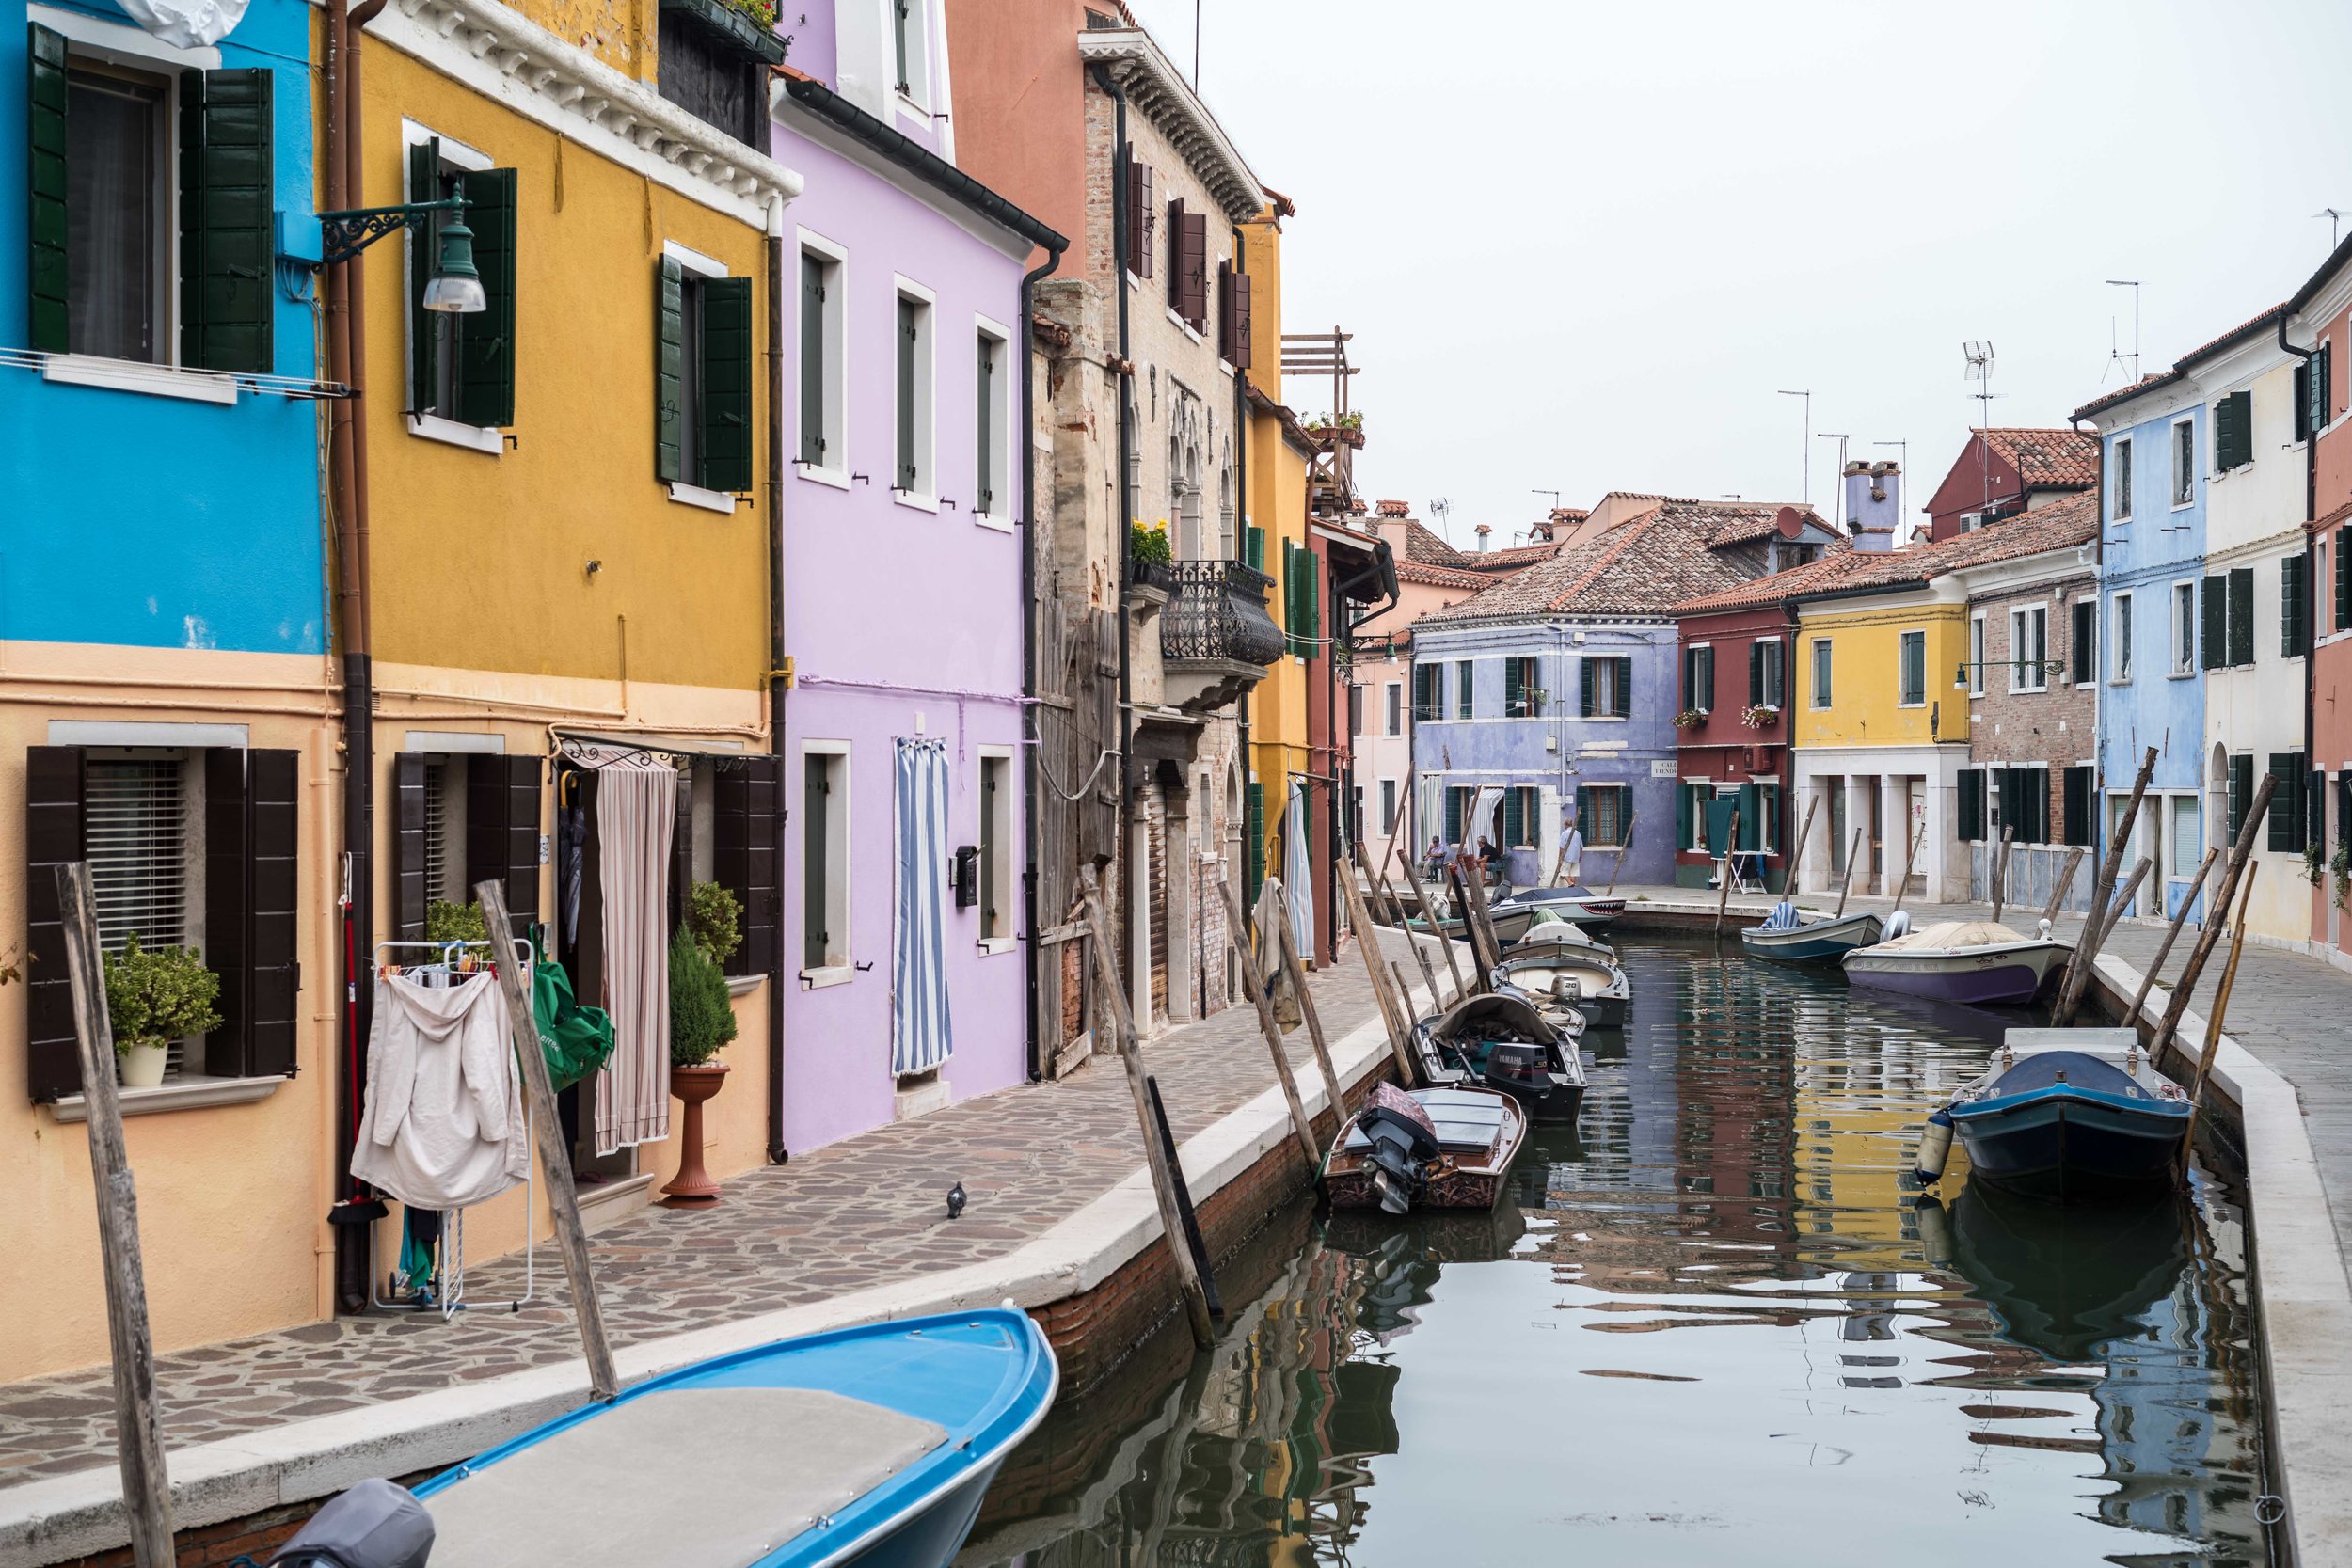   Burano Canal    Leica M10 1/350s F2 ISO100  